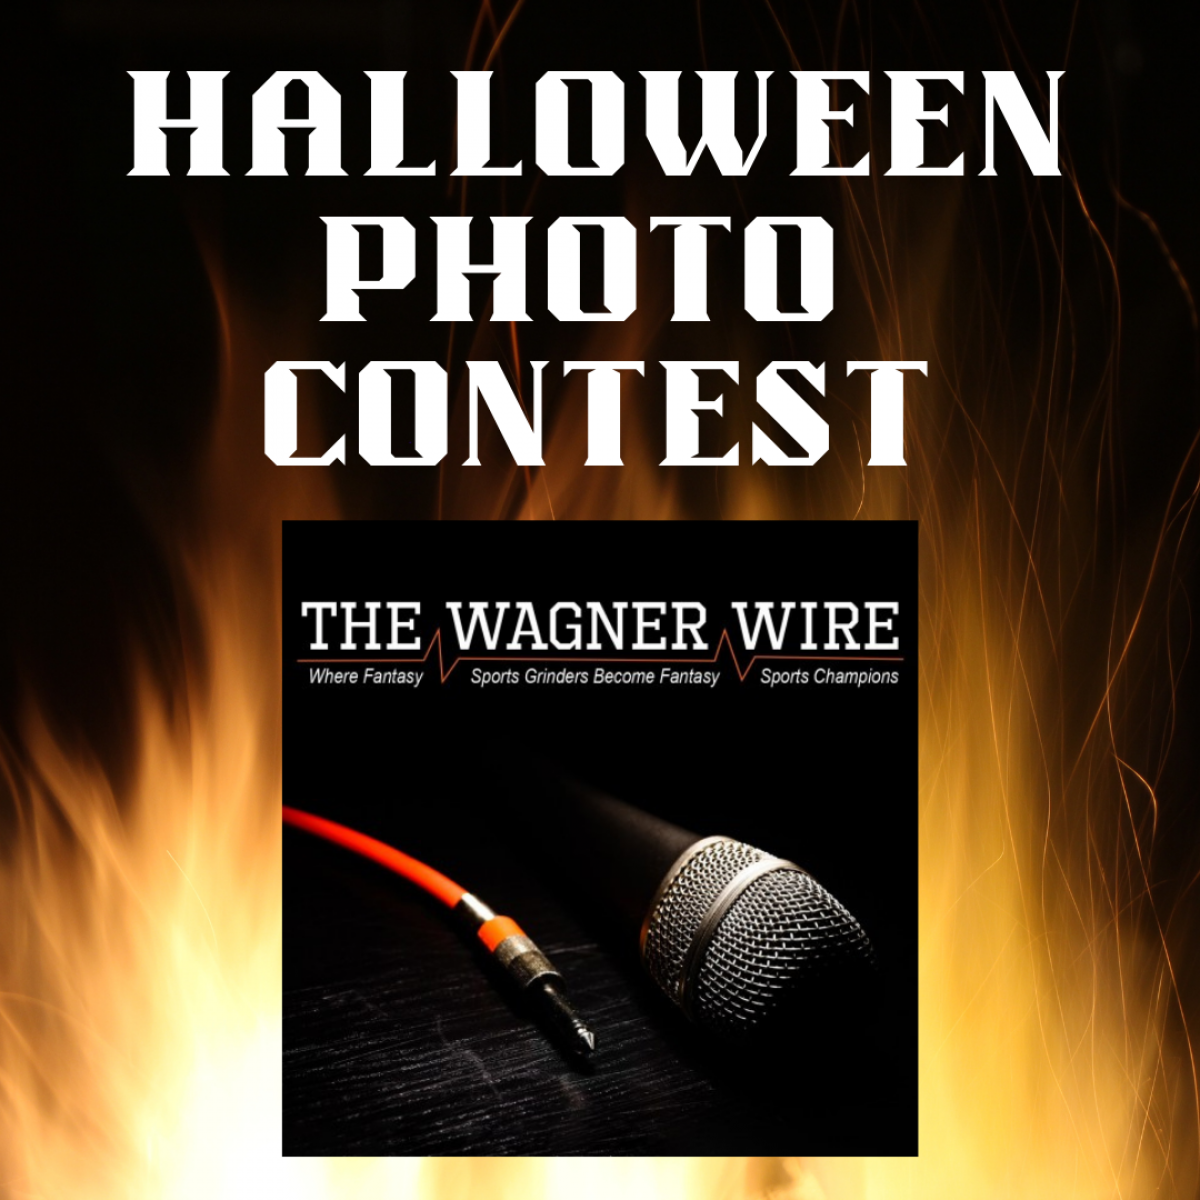 The Wagner Wire Halloween Photo Contest